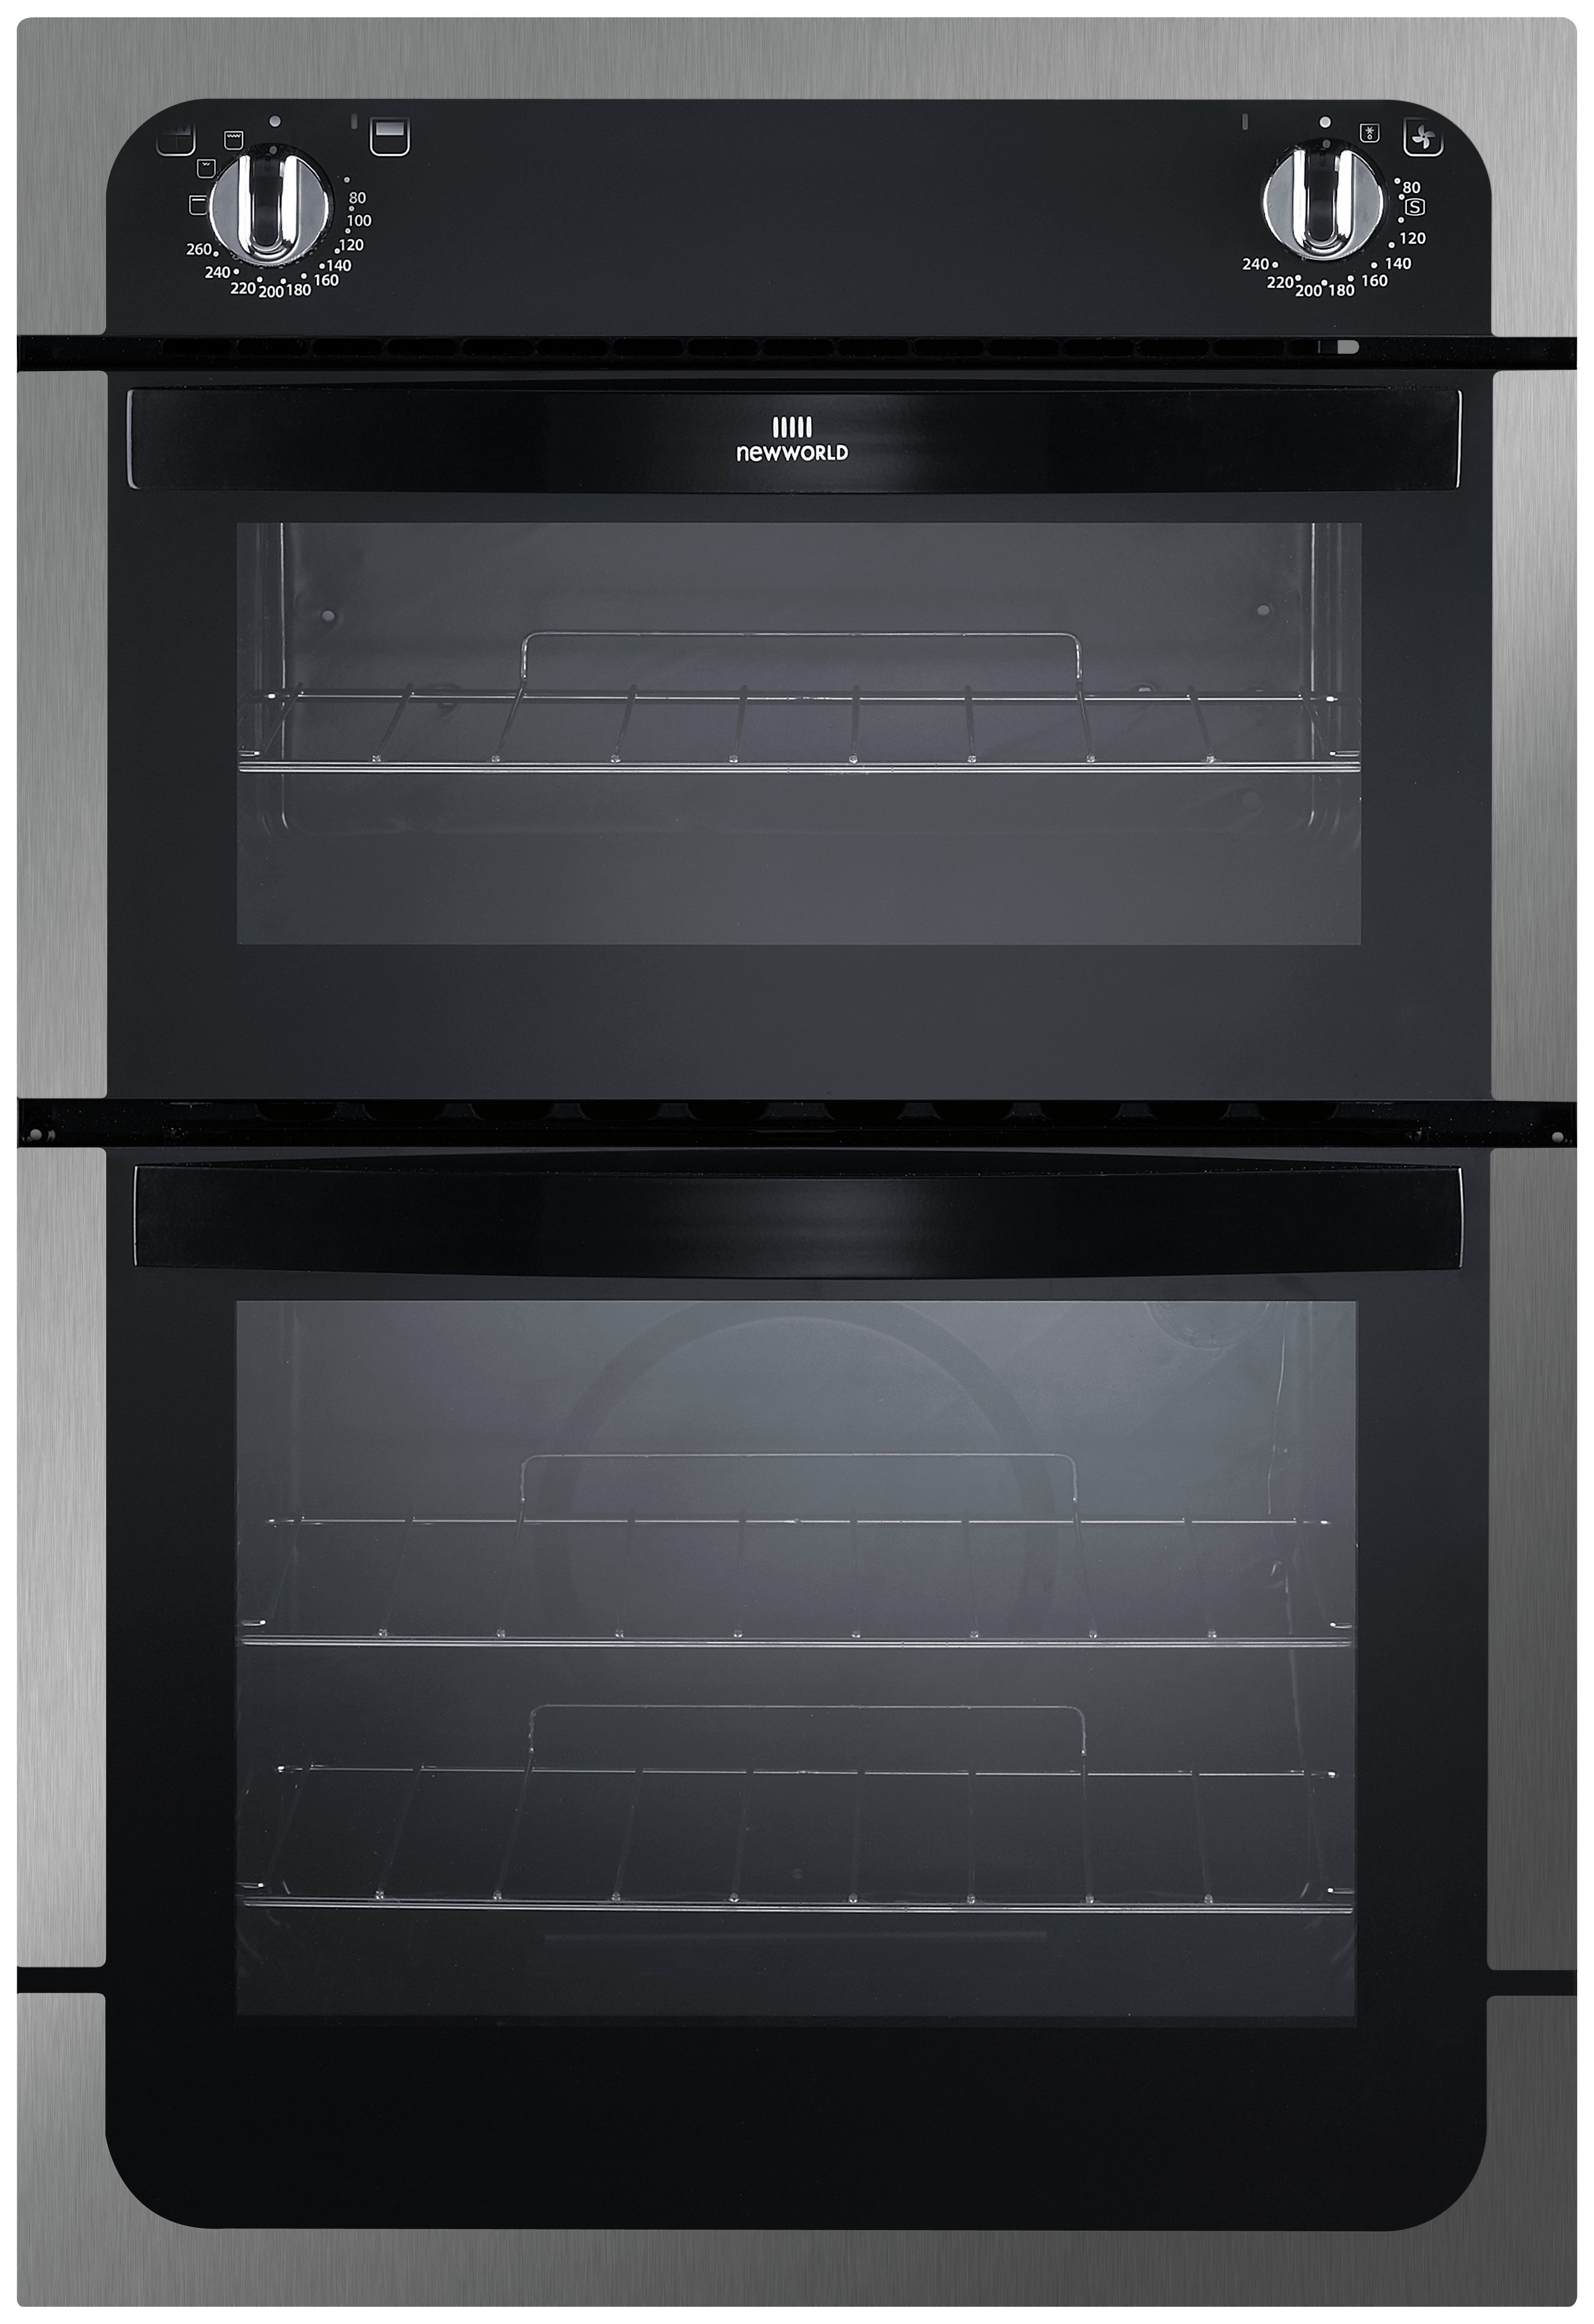 New World NW901DO Built-in Double Oven review